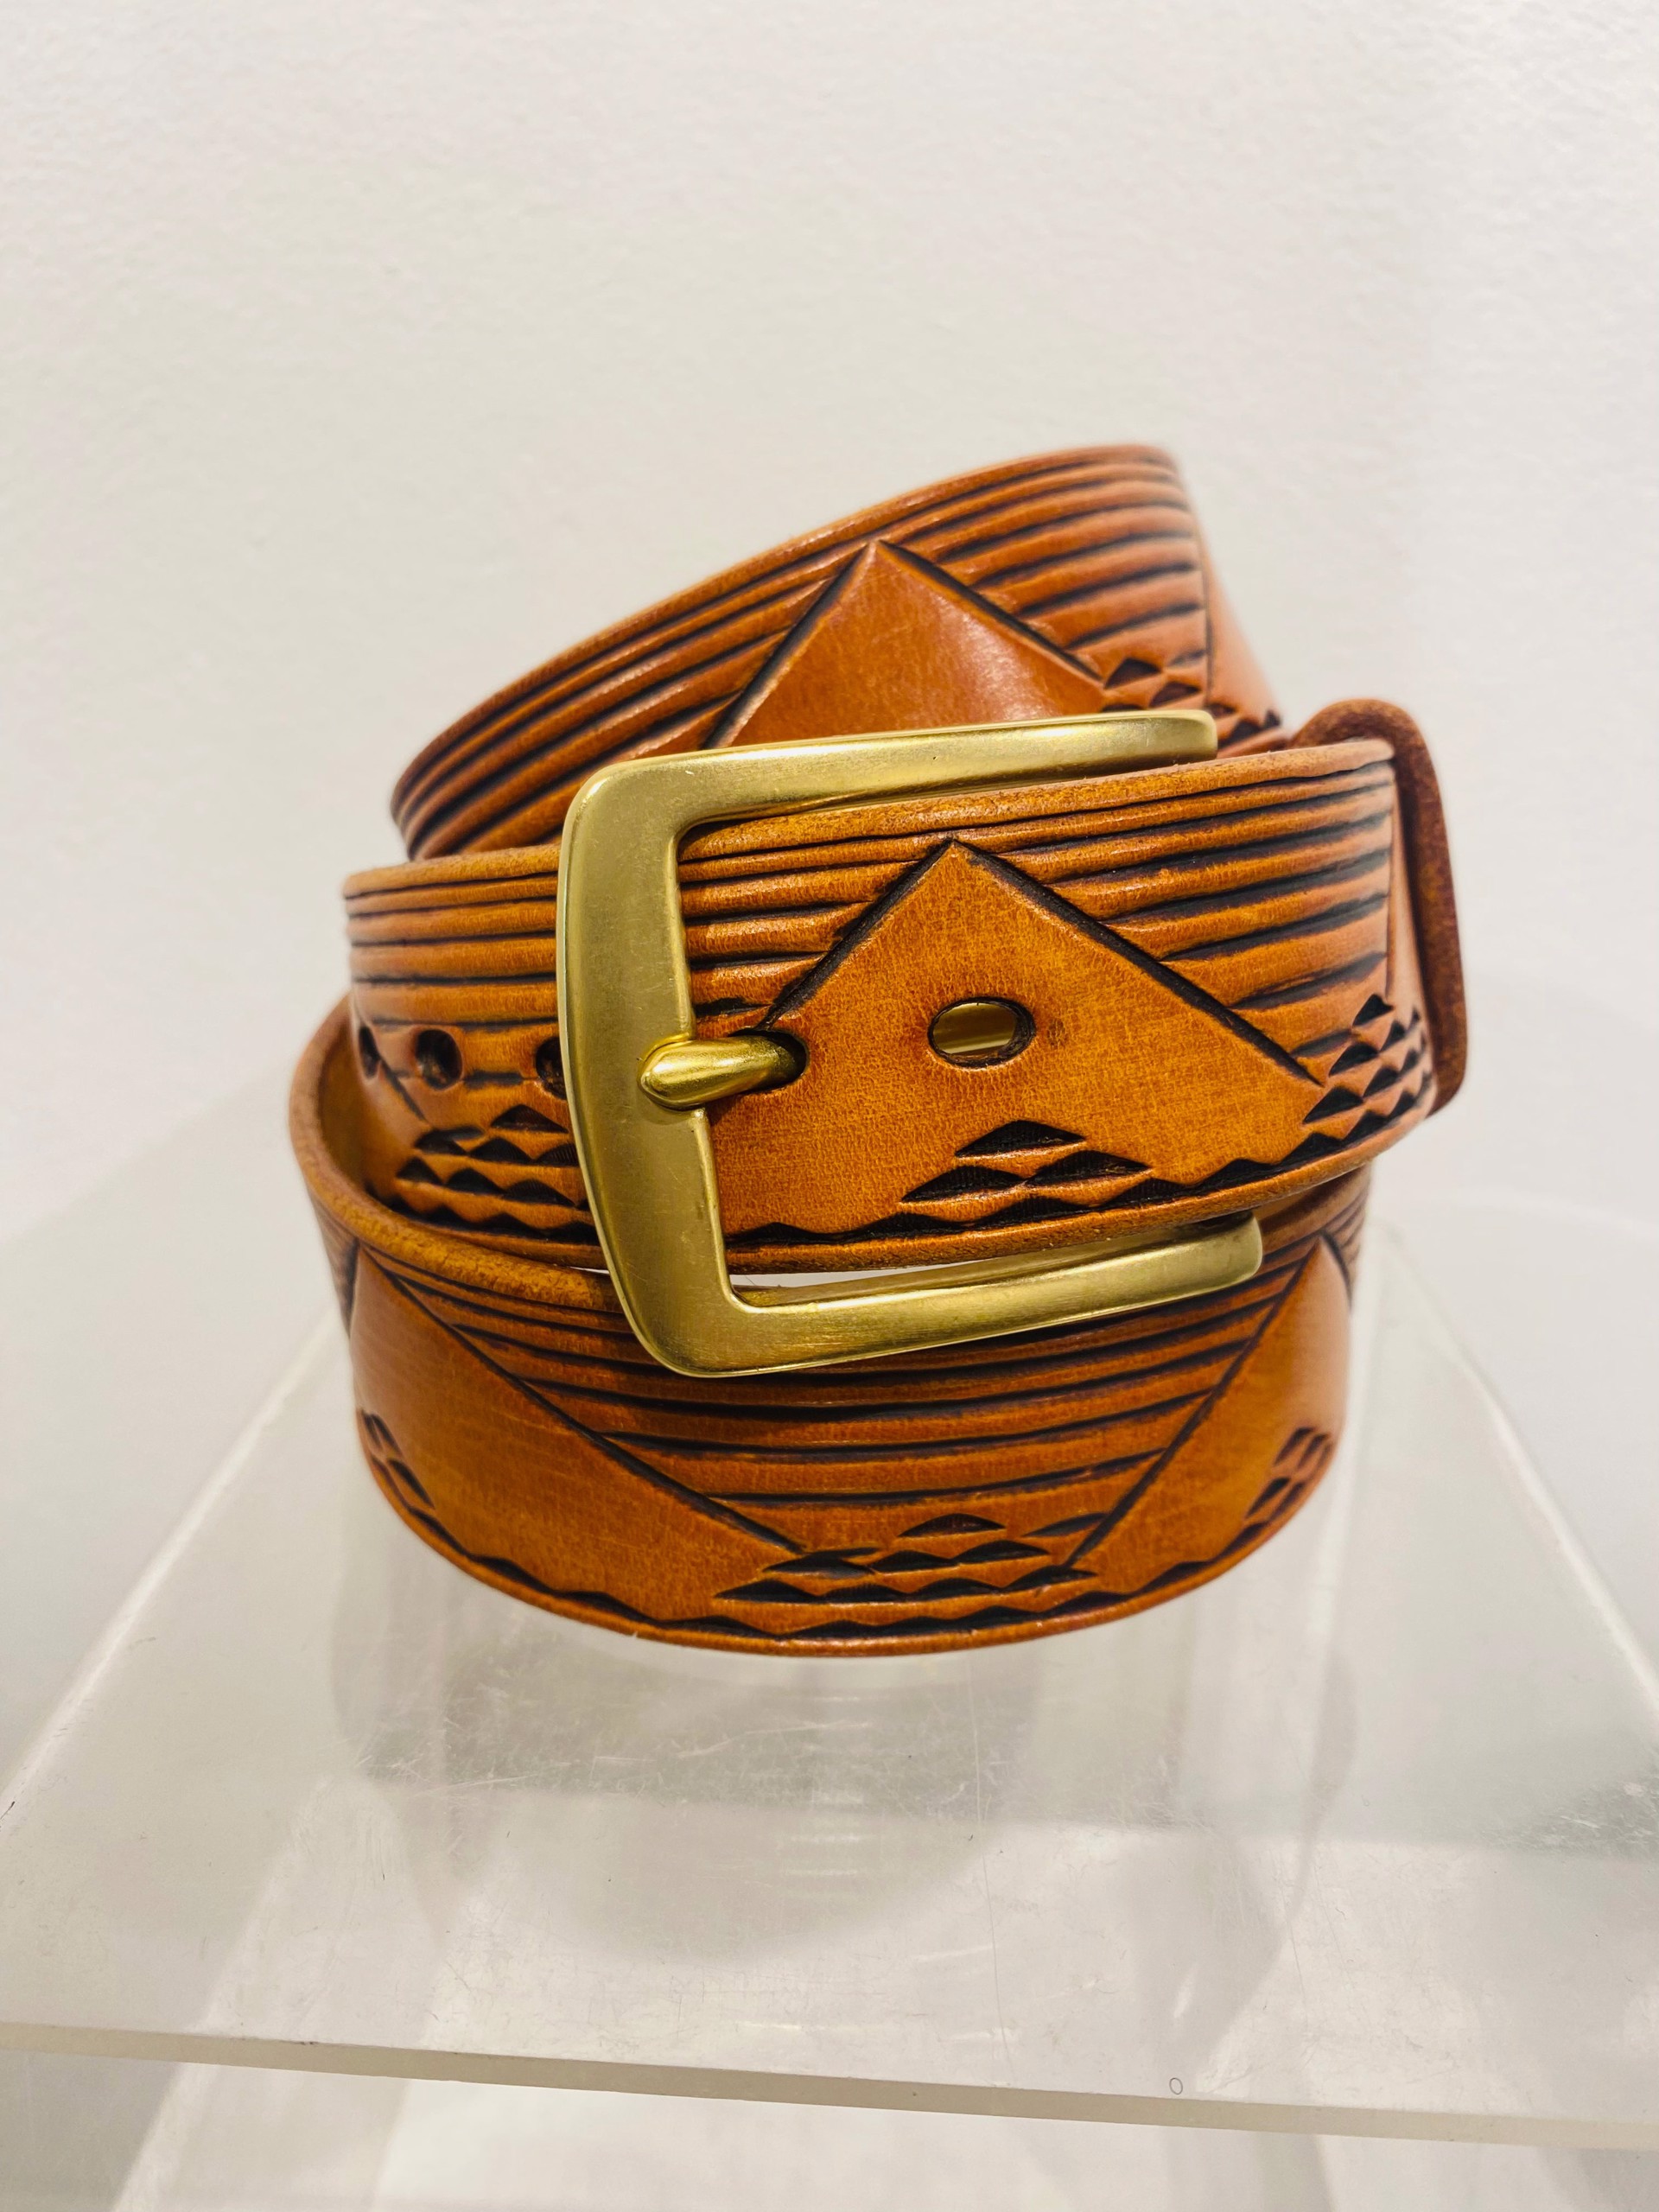 Leather Belt by The Unsaddled